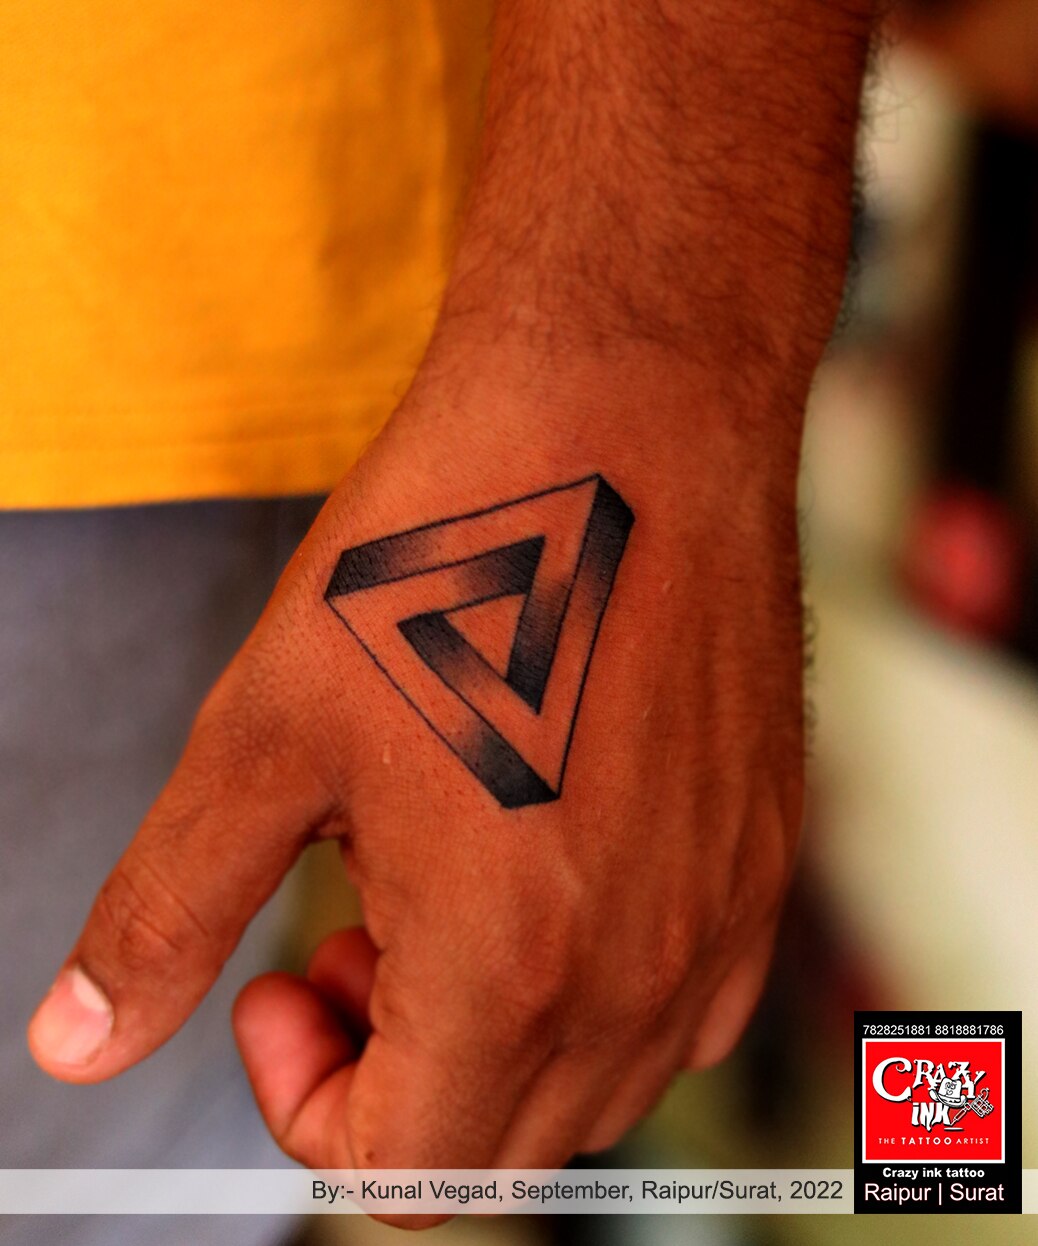 Tattoo uploaded by Pedro Augusto • Penrose triangle #triangles #triangle # PenroseTriangle #sostenes #tat #neck #triangletattoo #penrose • Tattoodo